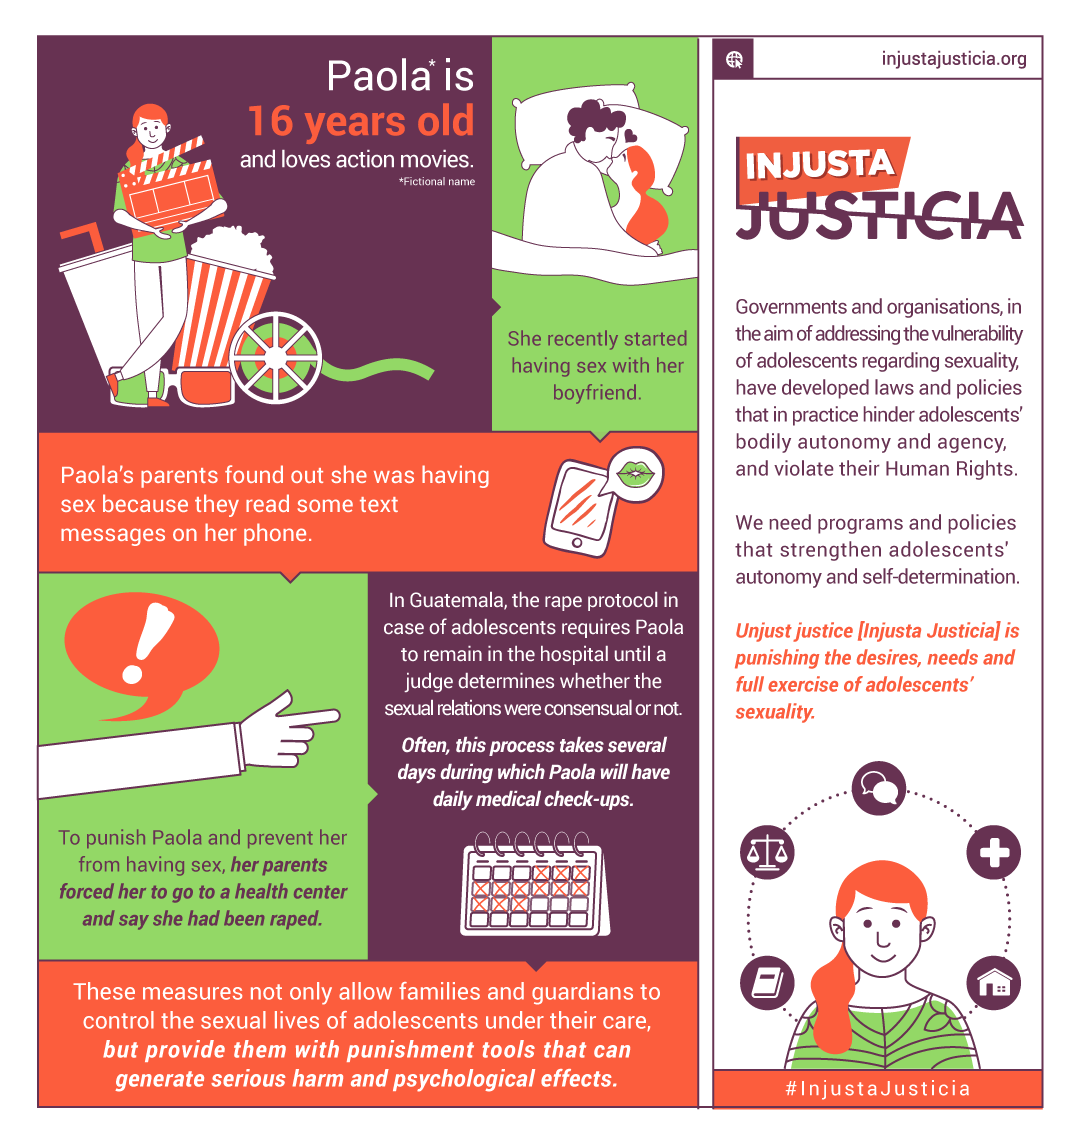 Infographic about Paola's case, which is explained below. Full description available for download.